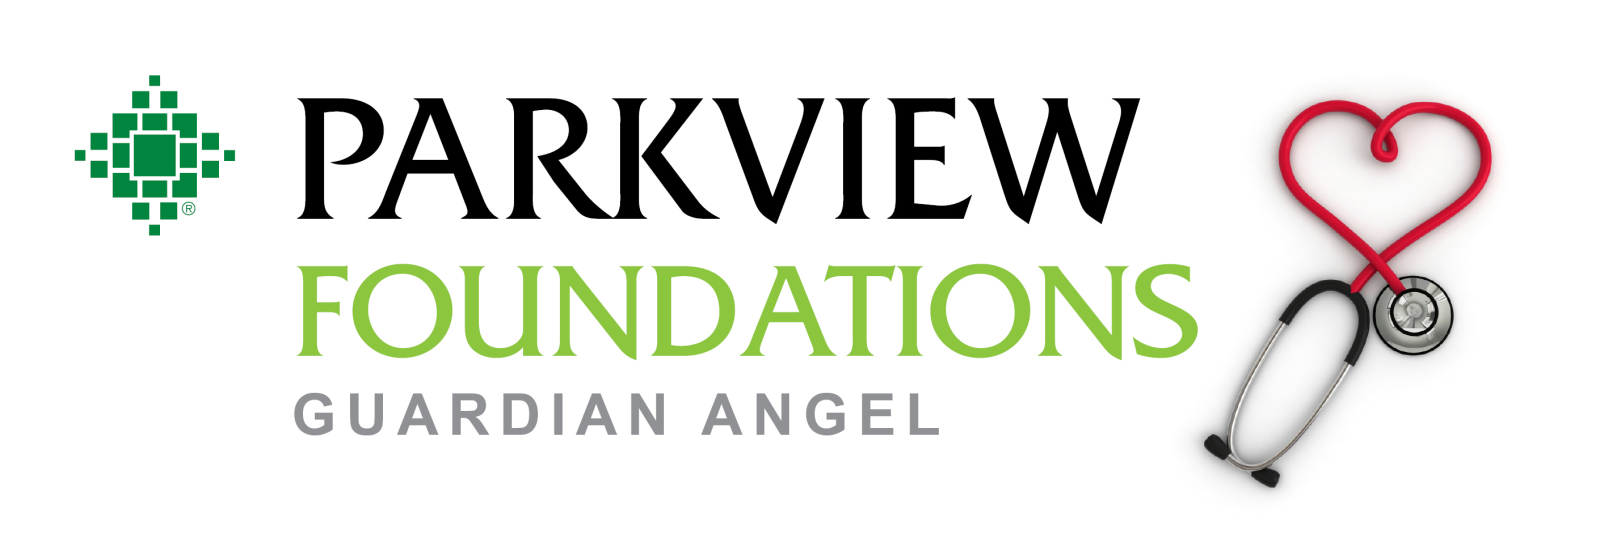 Parkview Foundations Guardian Angel